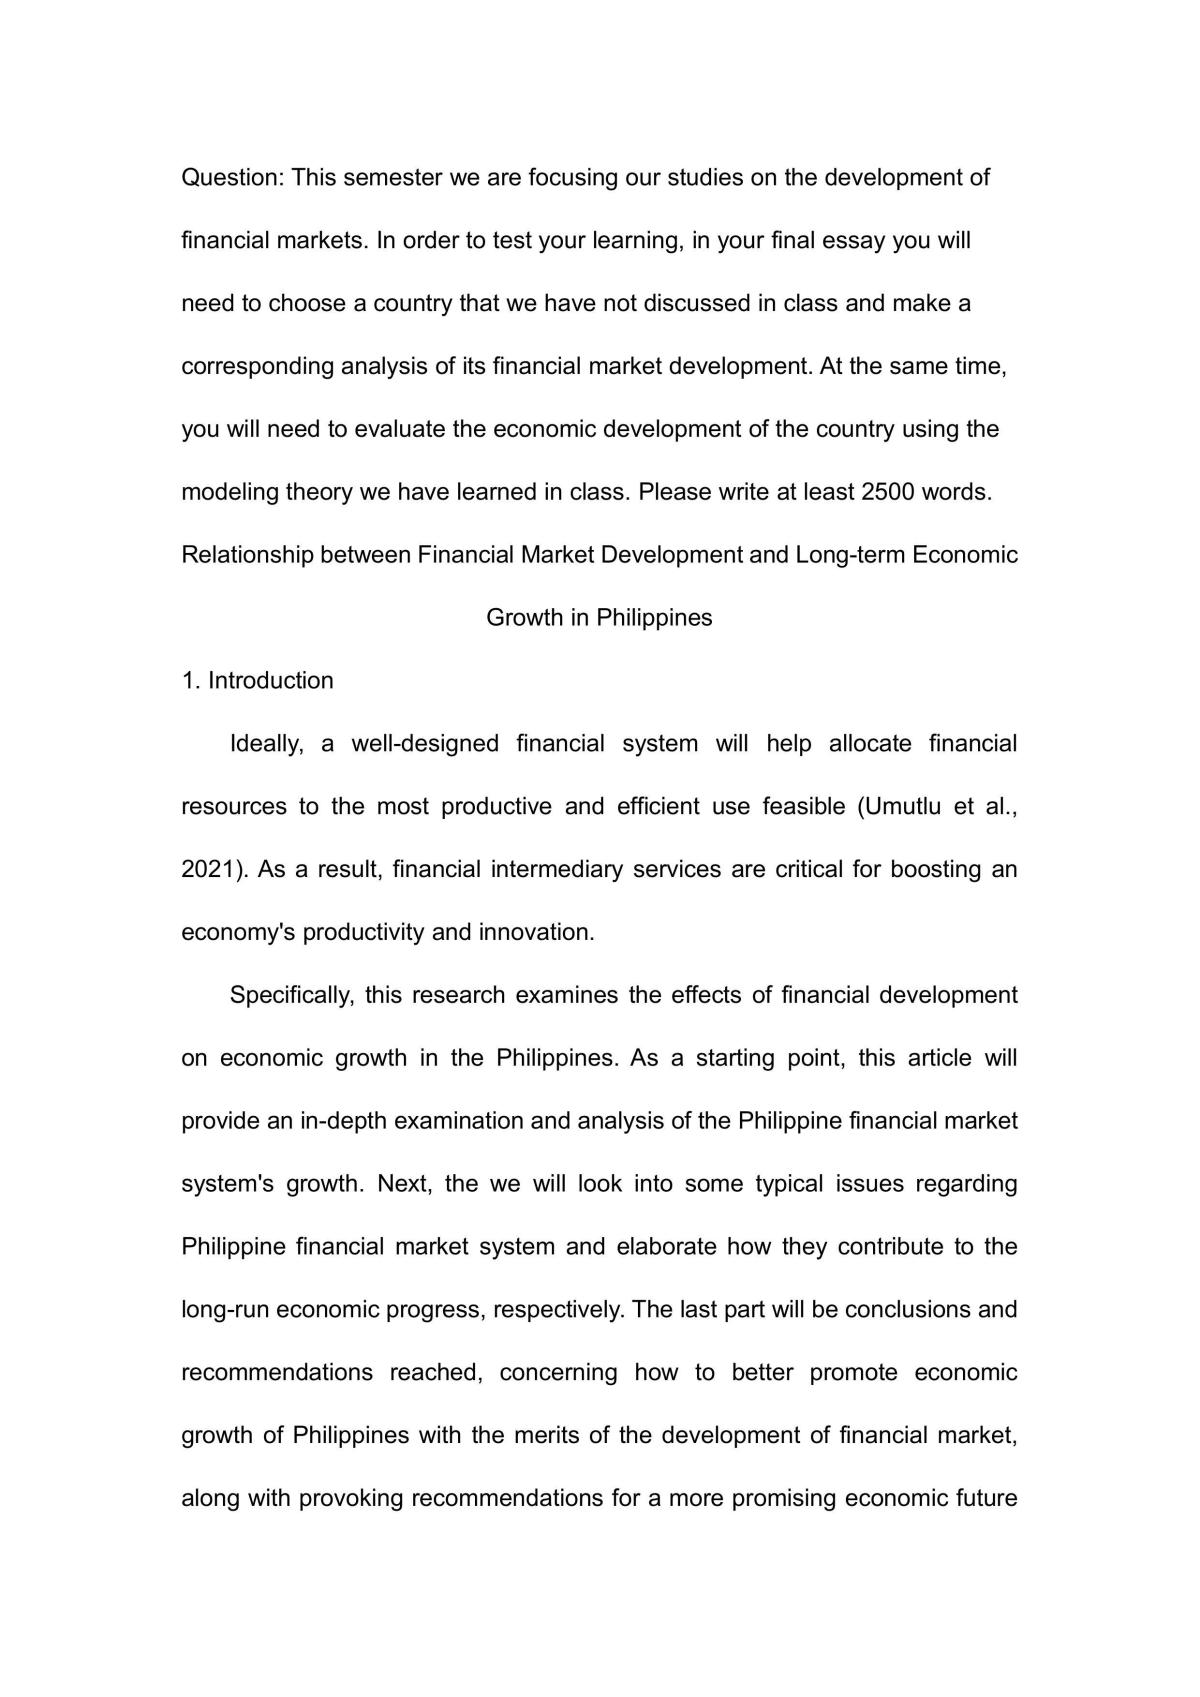 Relationship between Financial Market Development and Long-term Economic Growth in Philippines   - Page 1